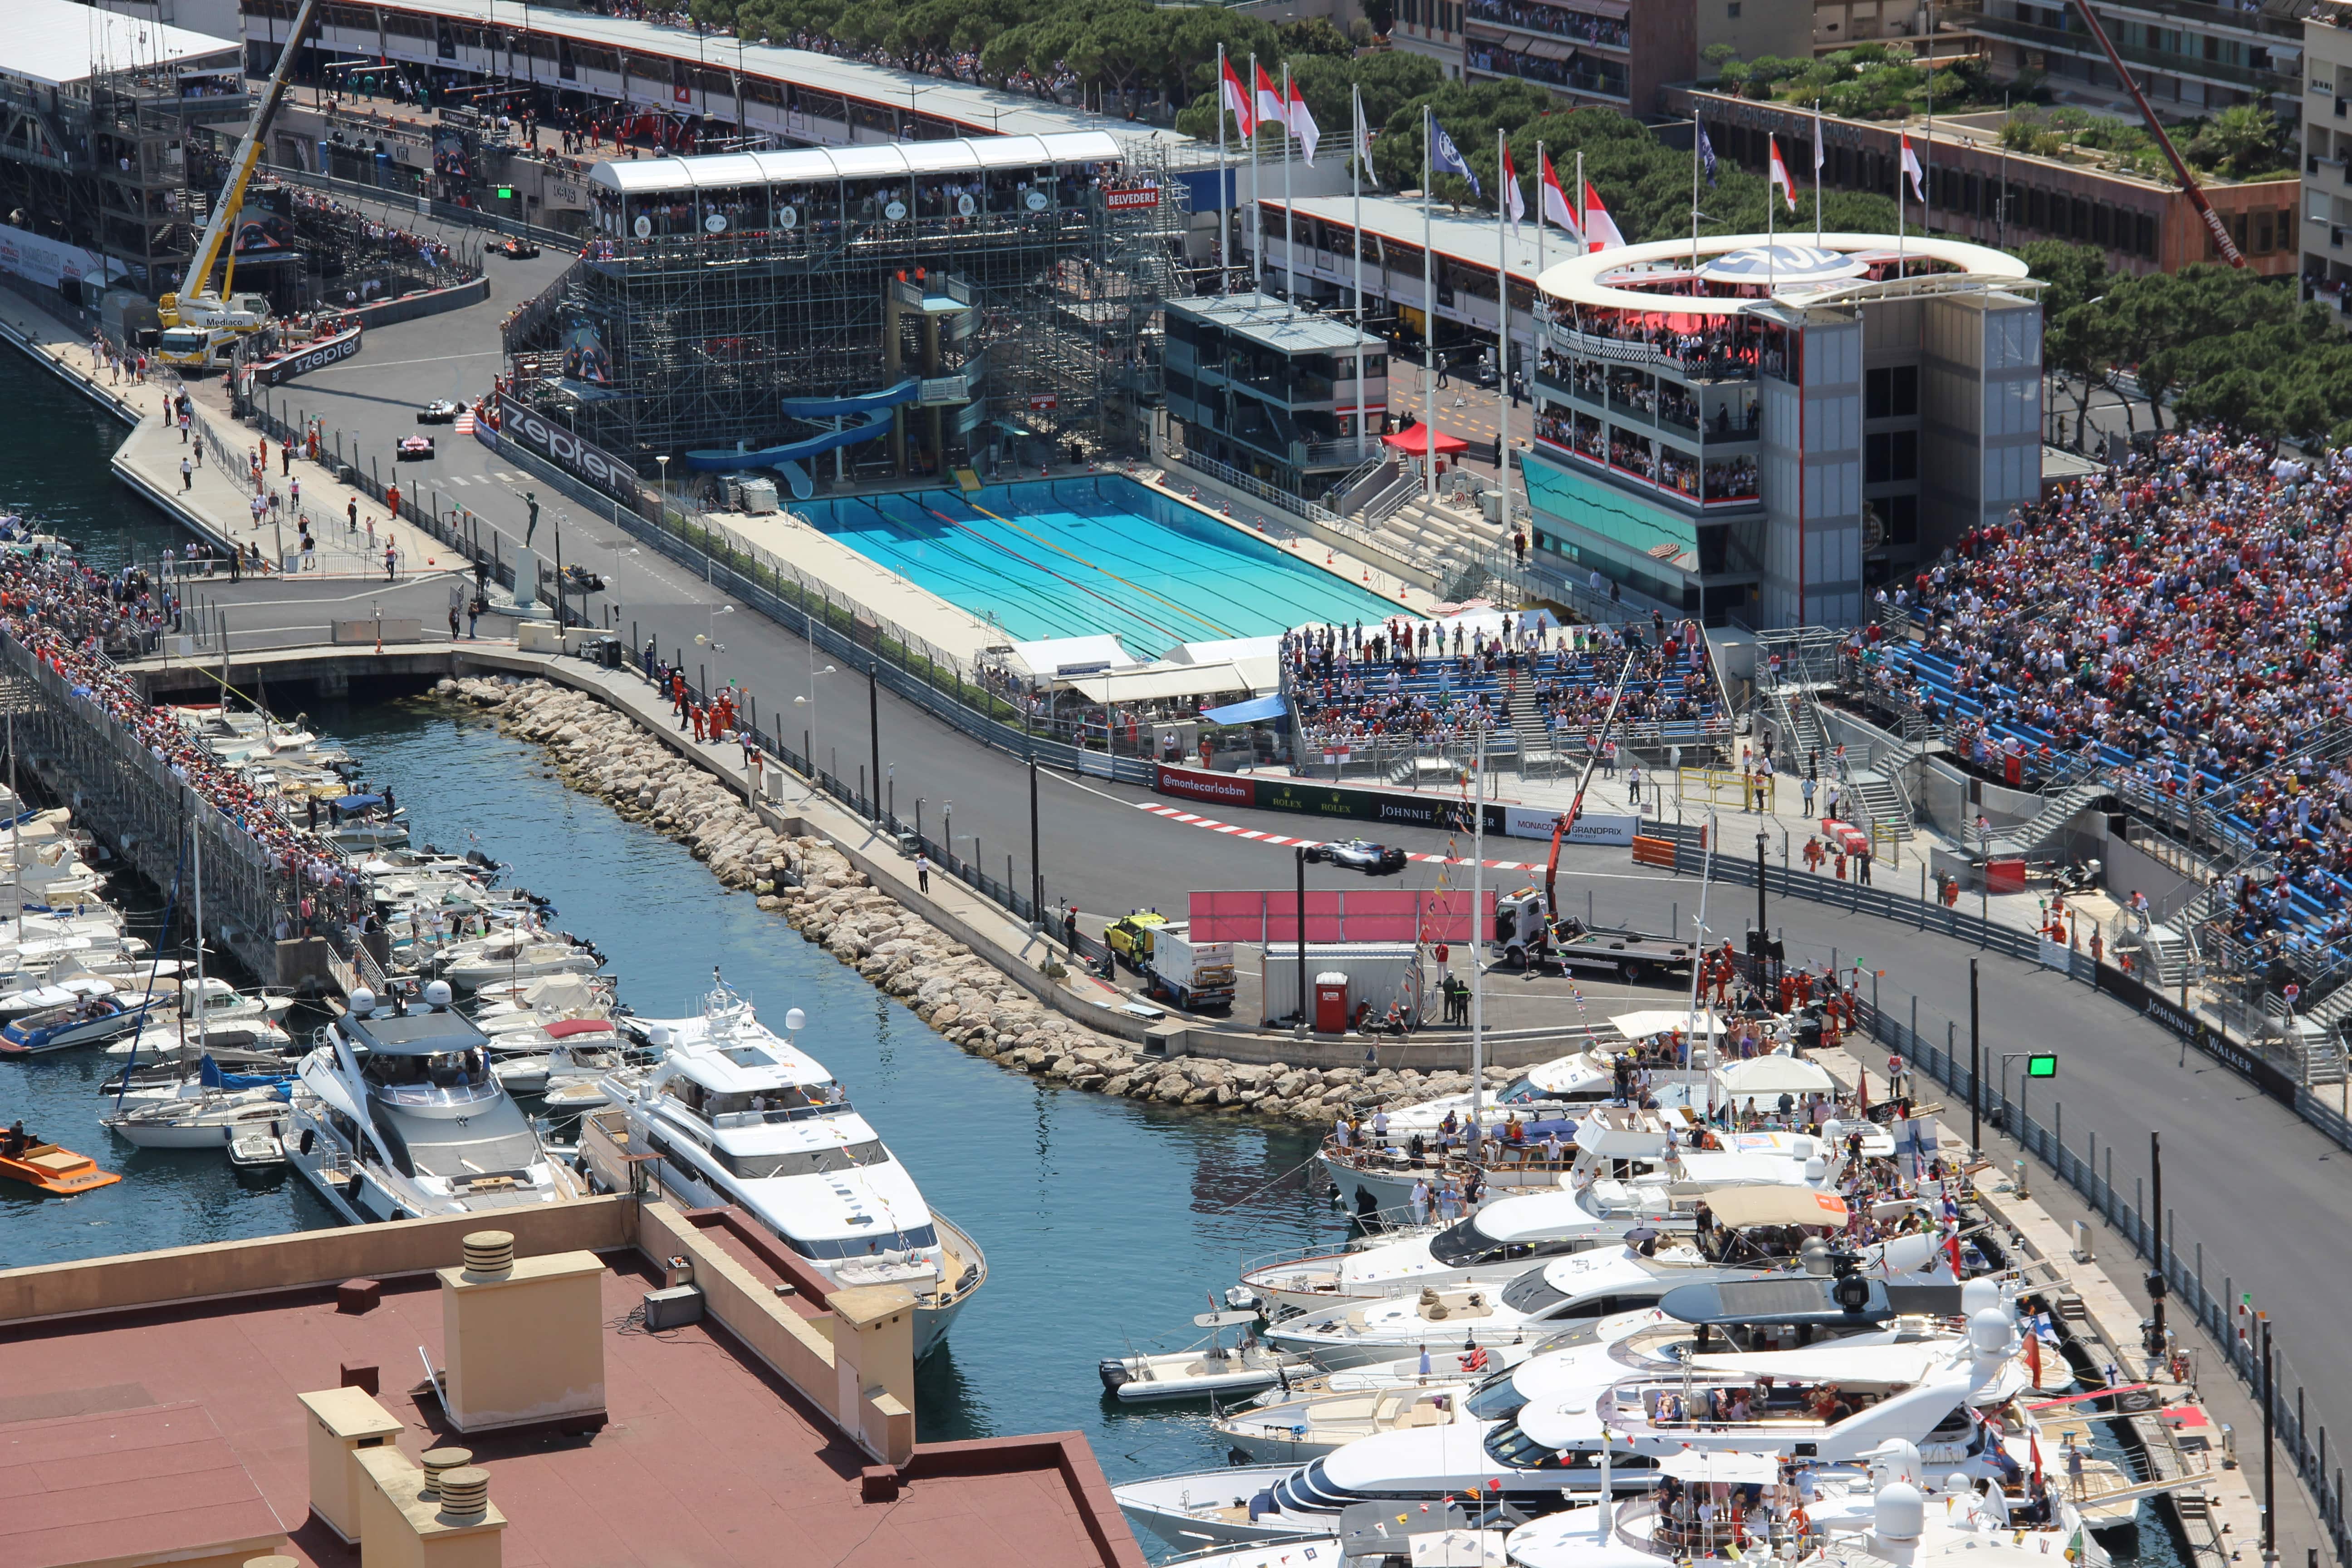 Best place for watching Formula 1 GP monaco? This is VIP Terrace of Formula 1! Reserve your place and feel like an F1 driver!!!